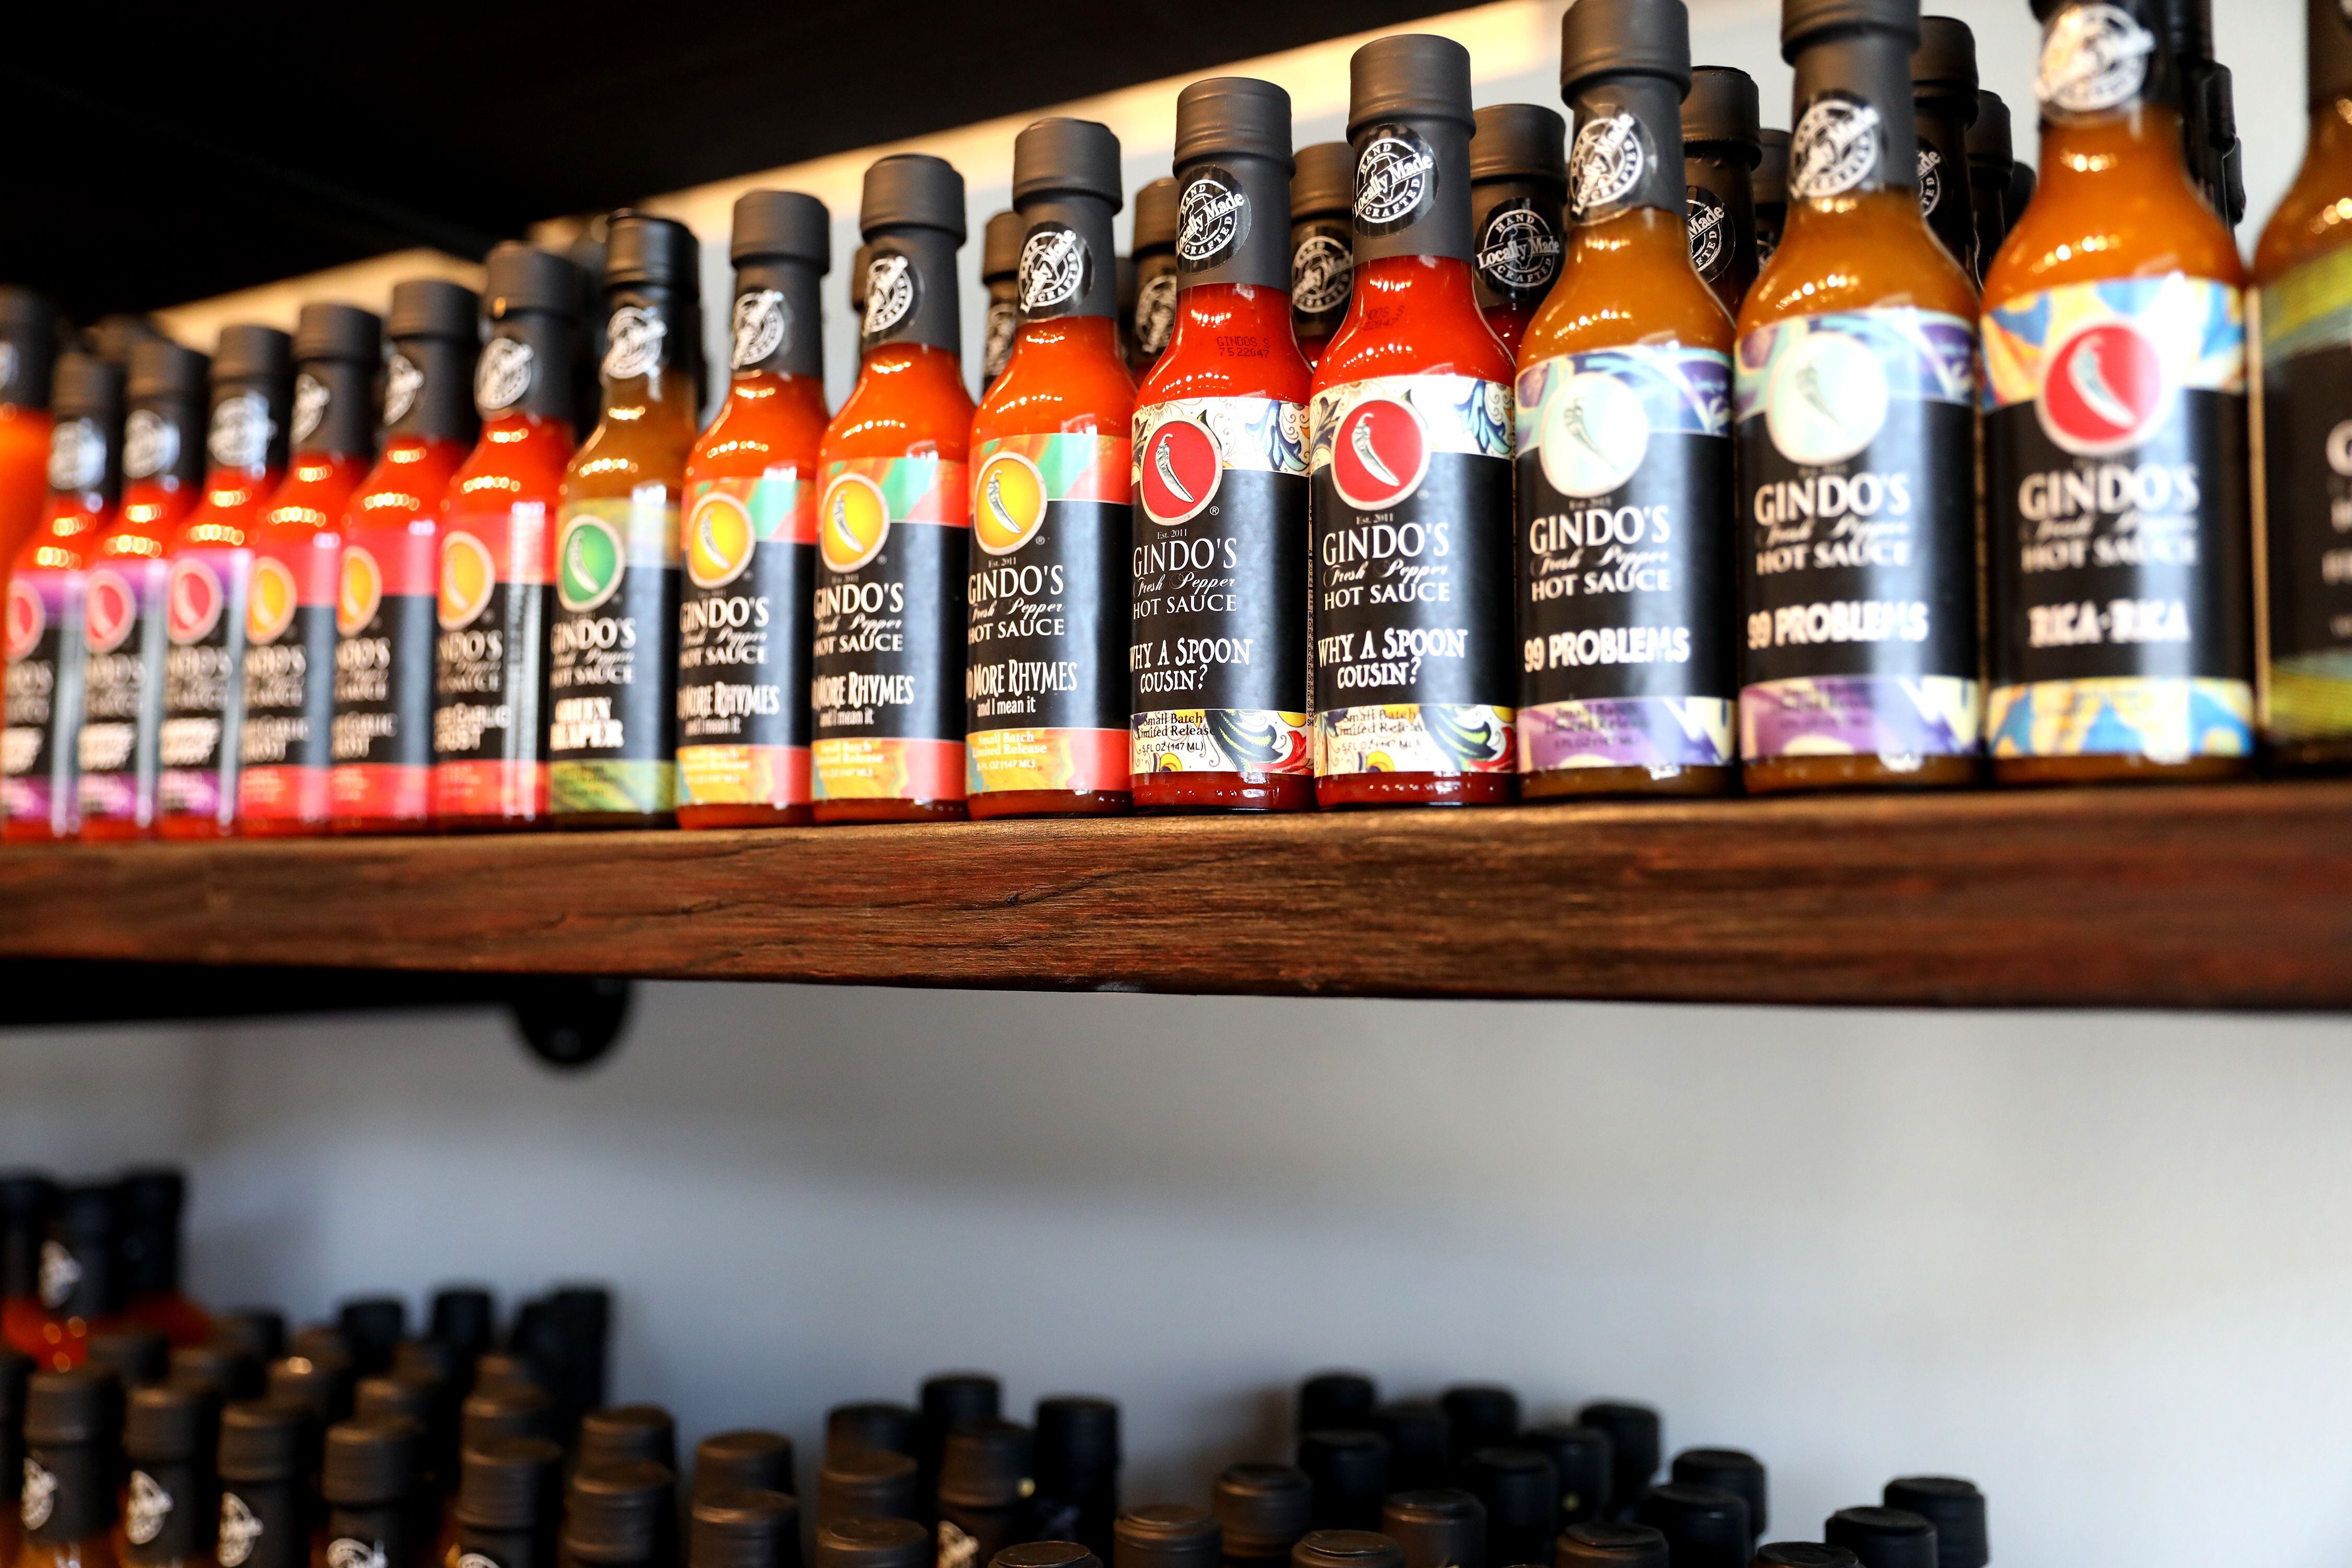 Gindo's Spice of Life: Award-Winning Fresh Pepper Craft Hot Sauces